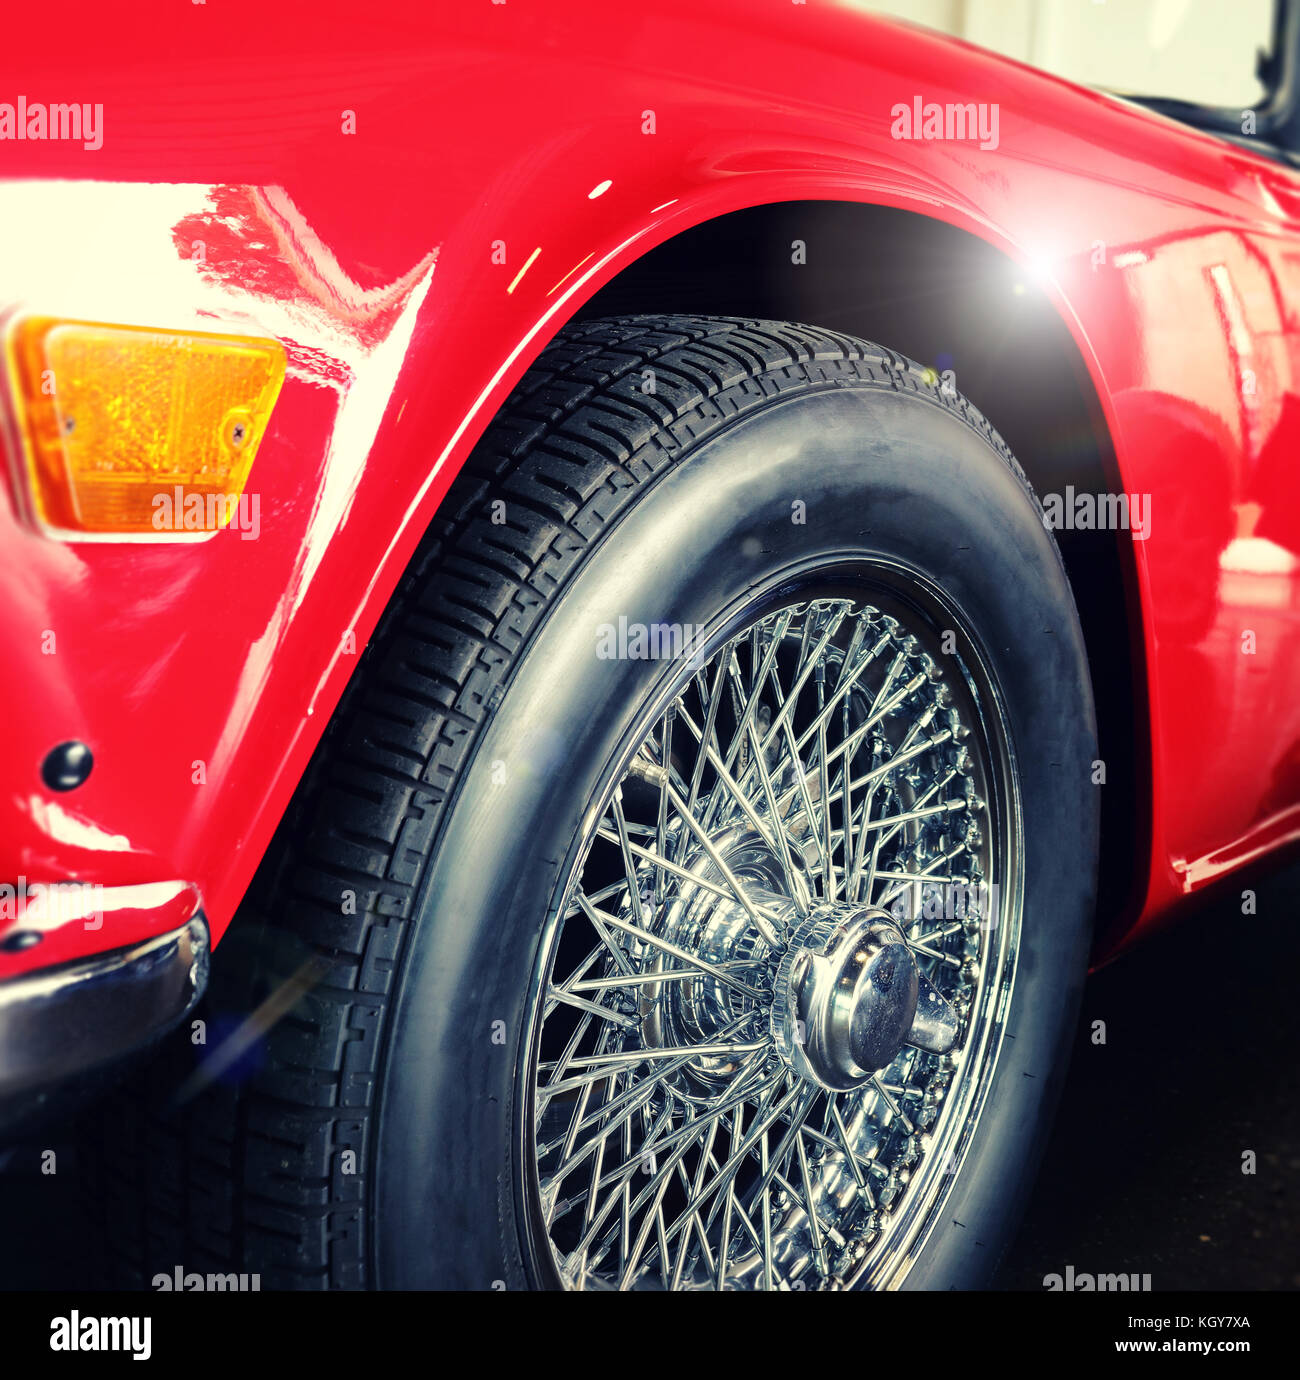 red car wire wheel spokes Stock Photo